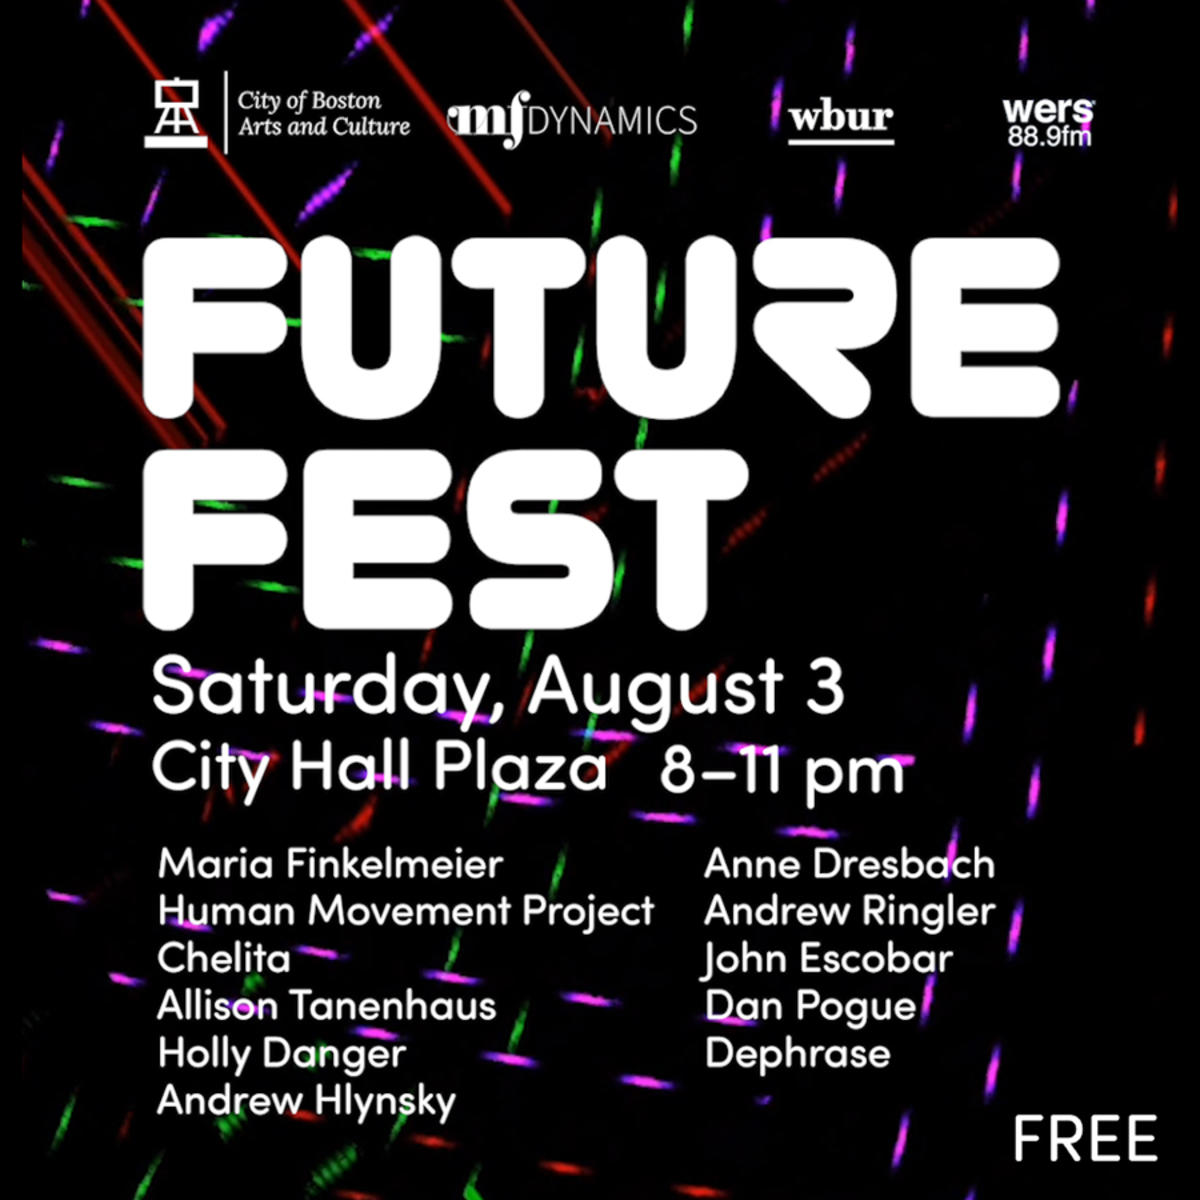 Flyer for FUTURE FEST happening on City Hall Plaza Sat. August 3 from 8 - 11 PM